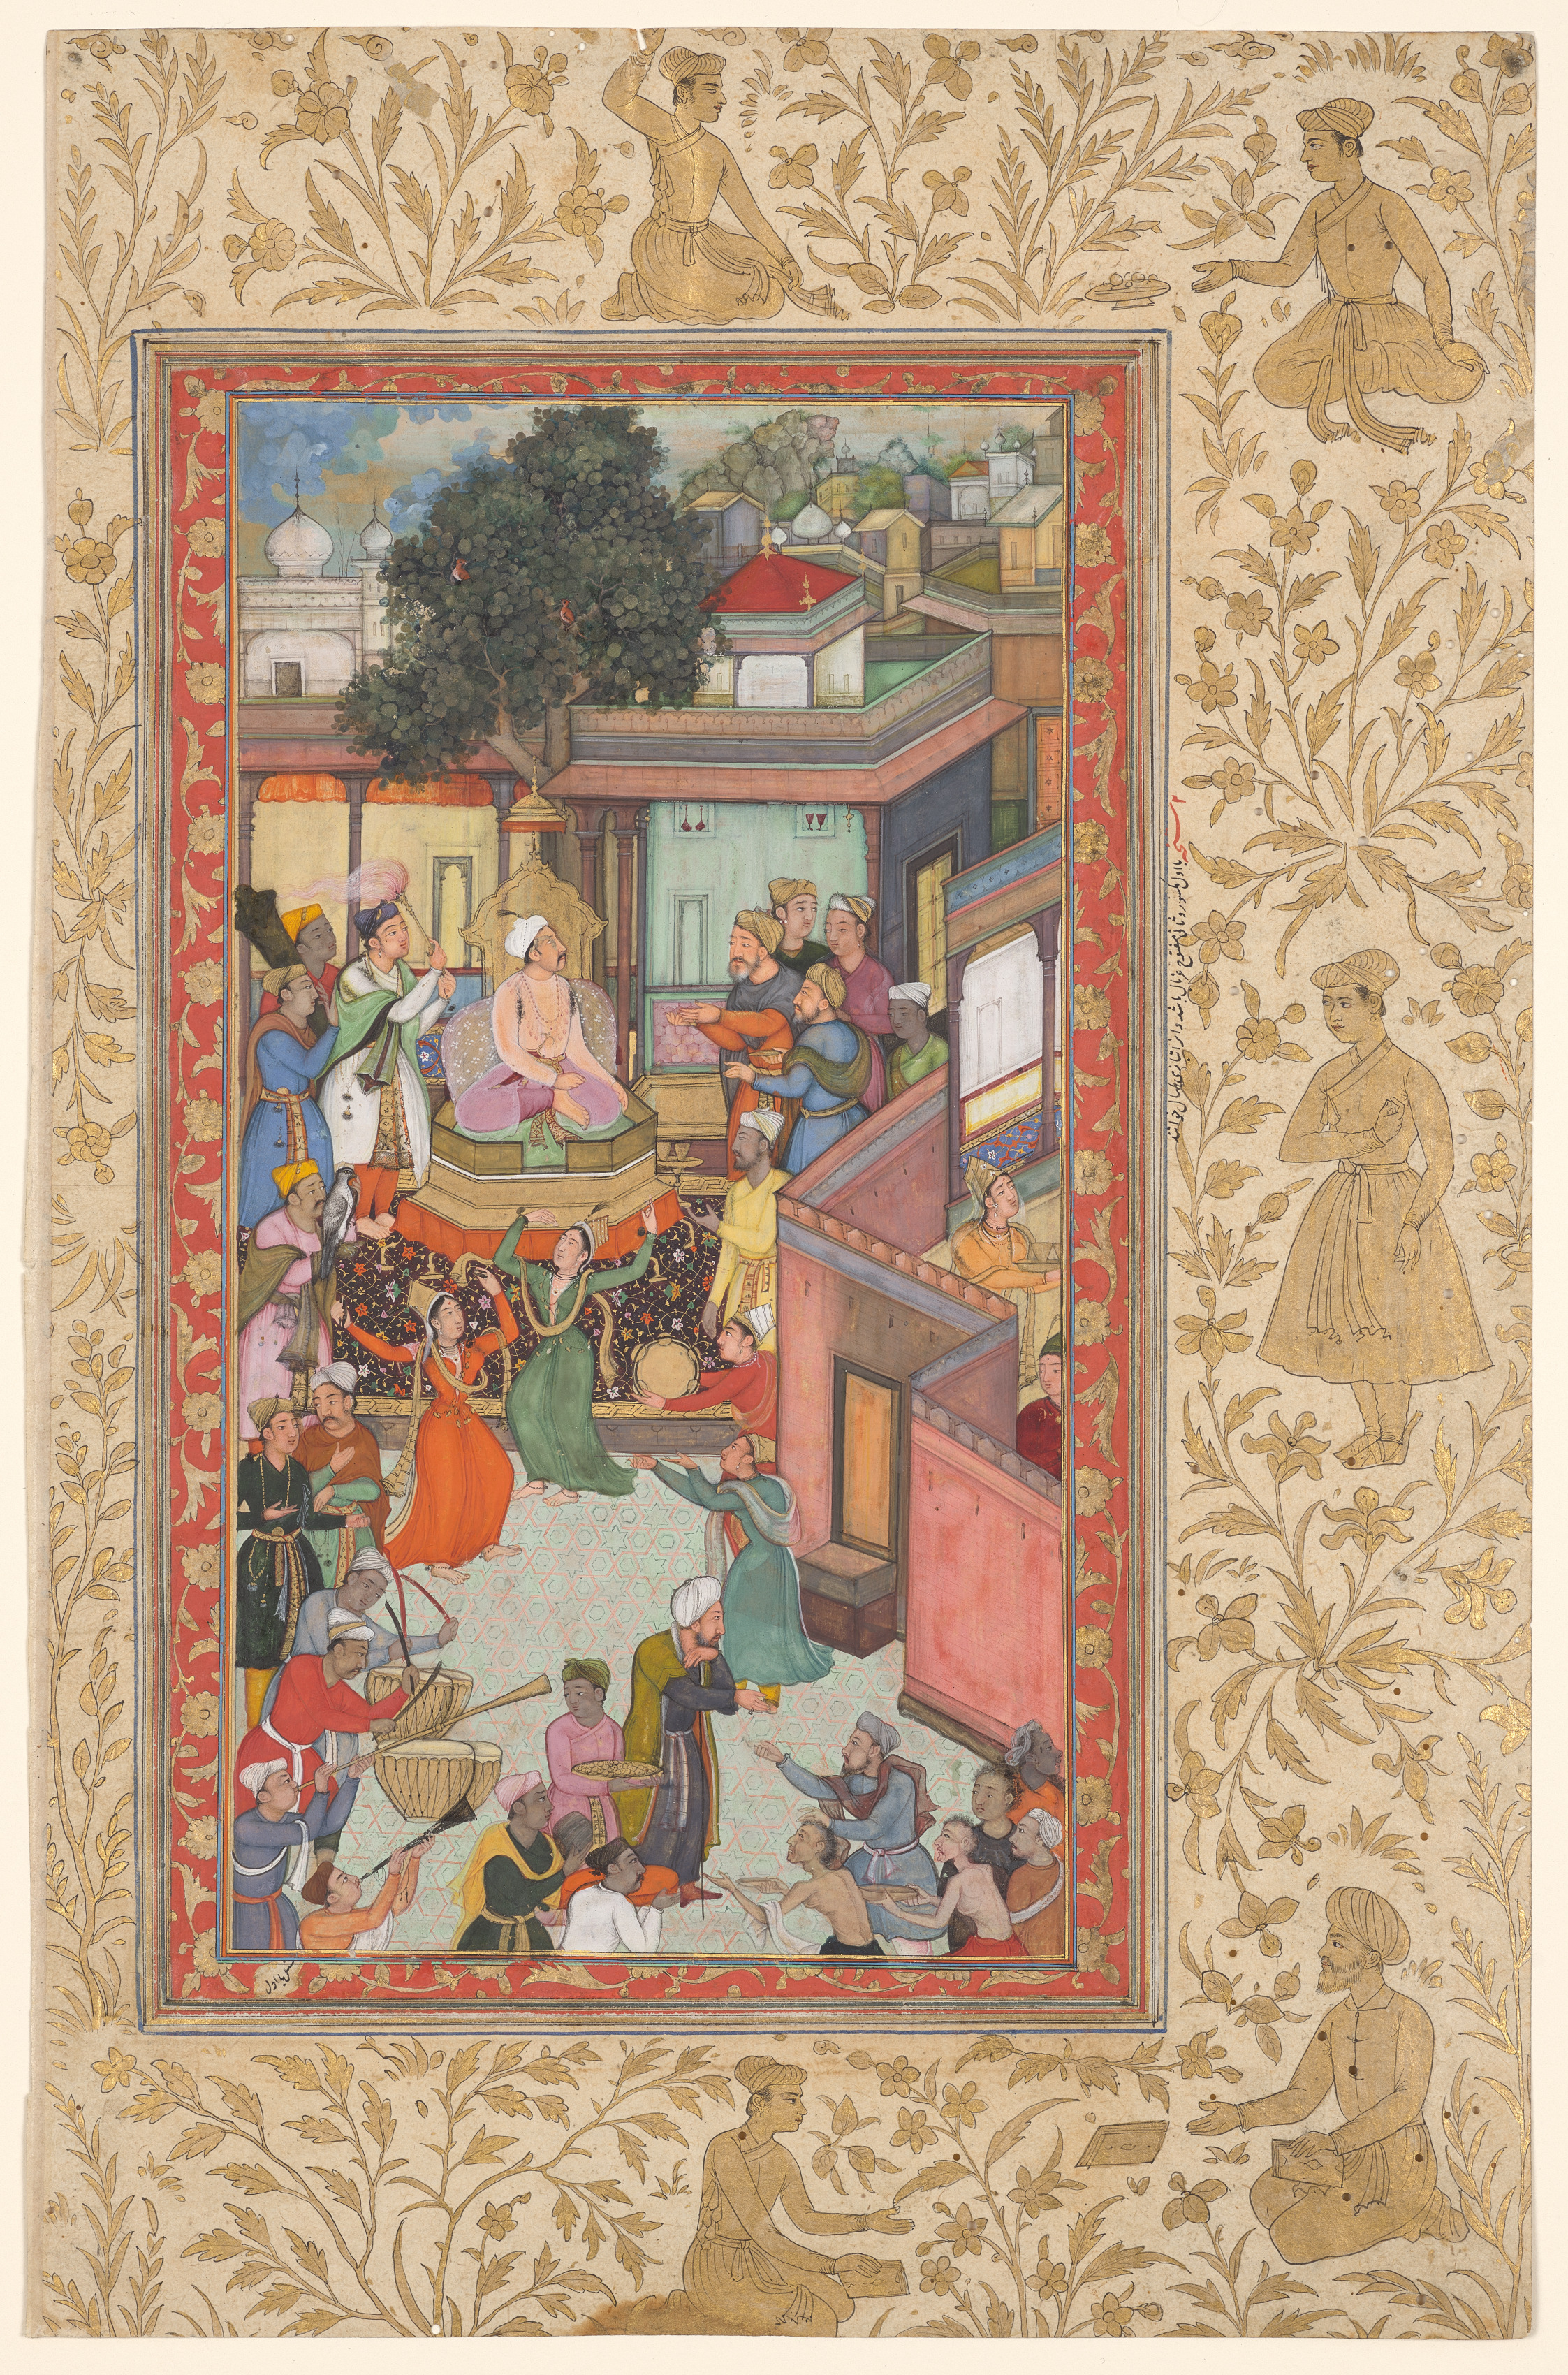 Circumcision ceremony for Akbar’s sons, painting 126 from an Akbar-nama (Book of Akbar) of Abu’l Fazl (Indian, 1551–1602)